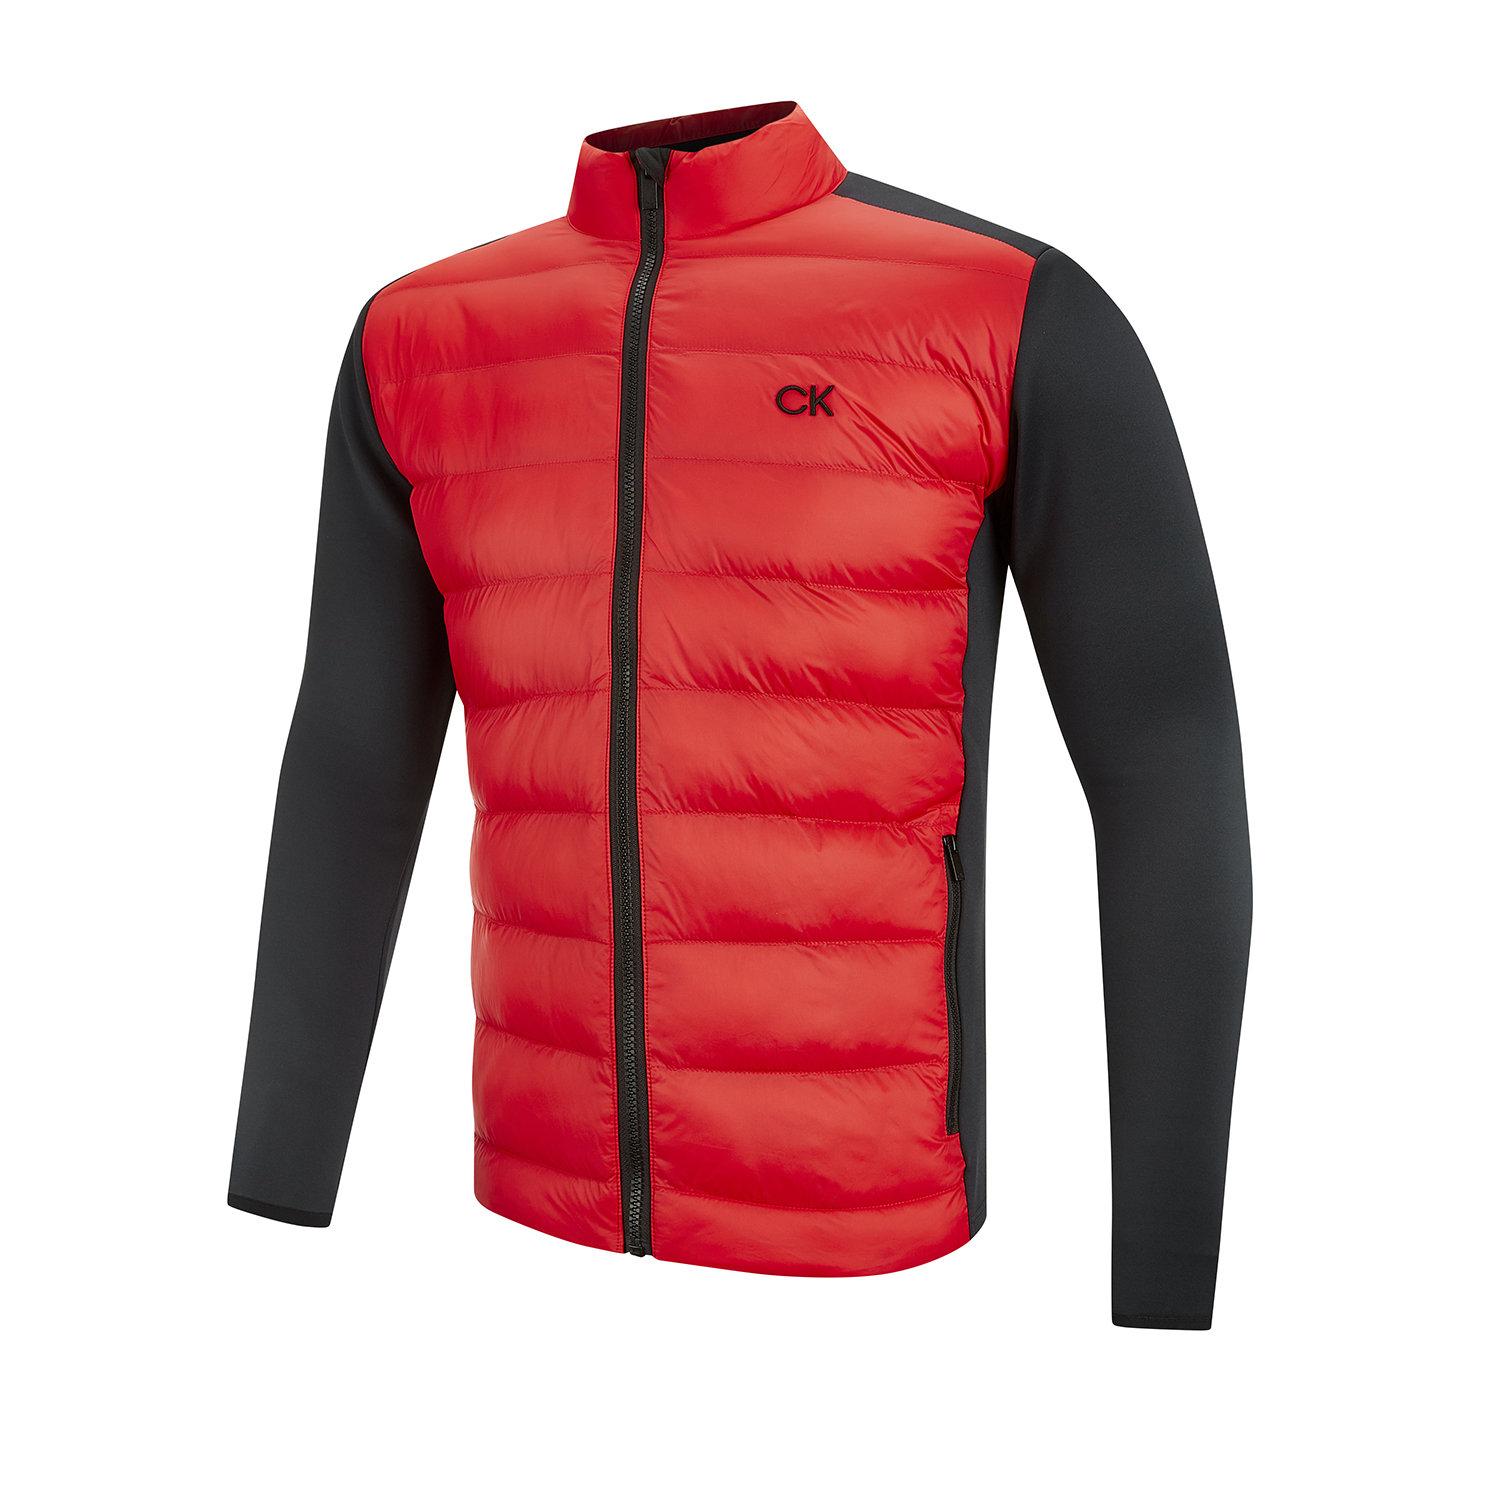 Calvin Klein Golf Golf County | & | | from Hybrid Jacket Sale Jackets, Golf Vests Quilted Gilets Clo